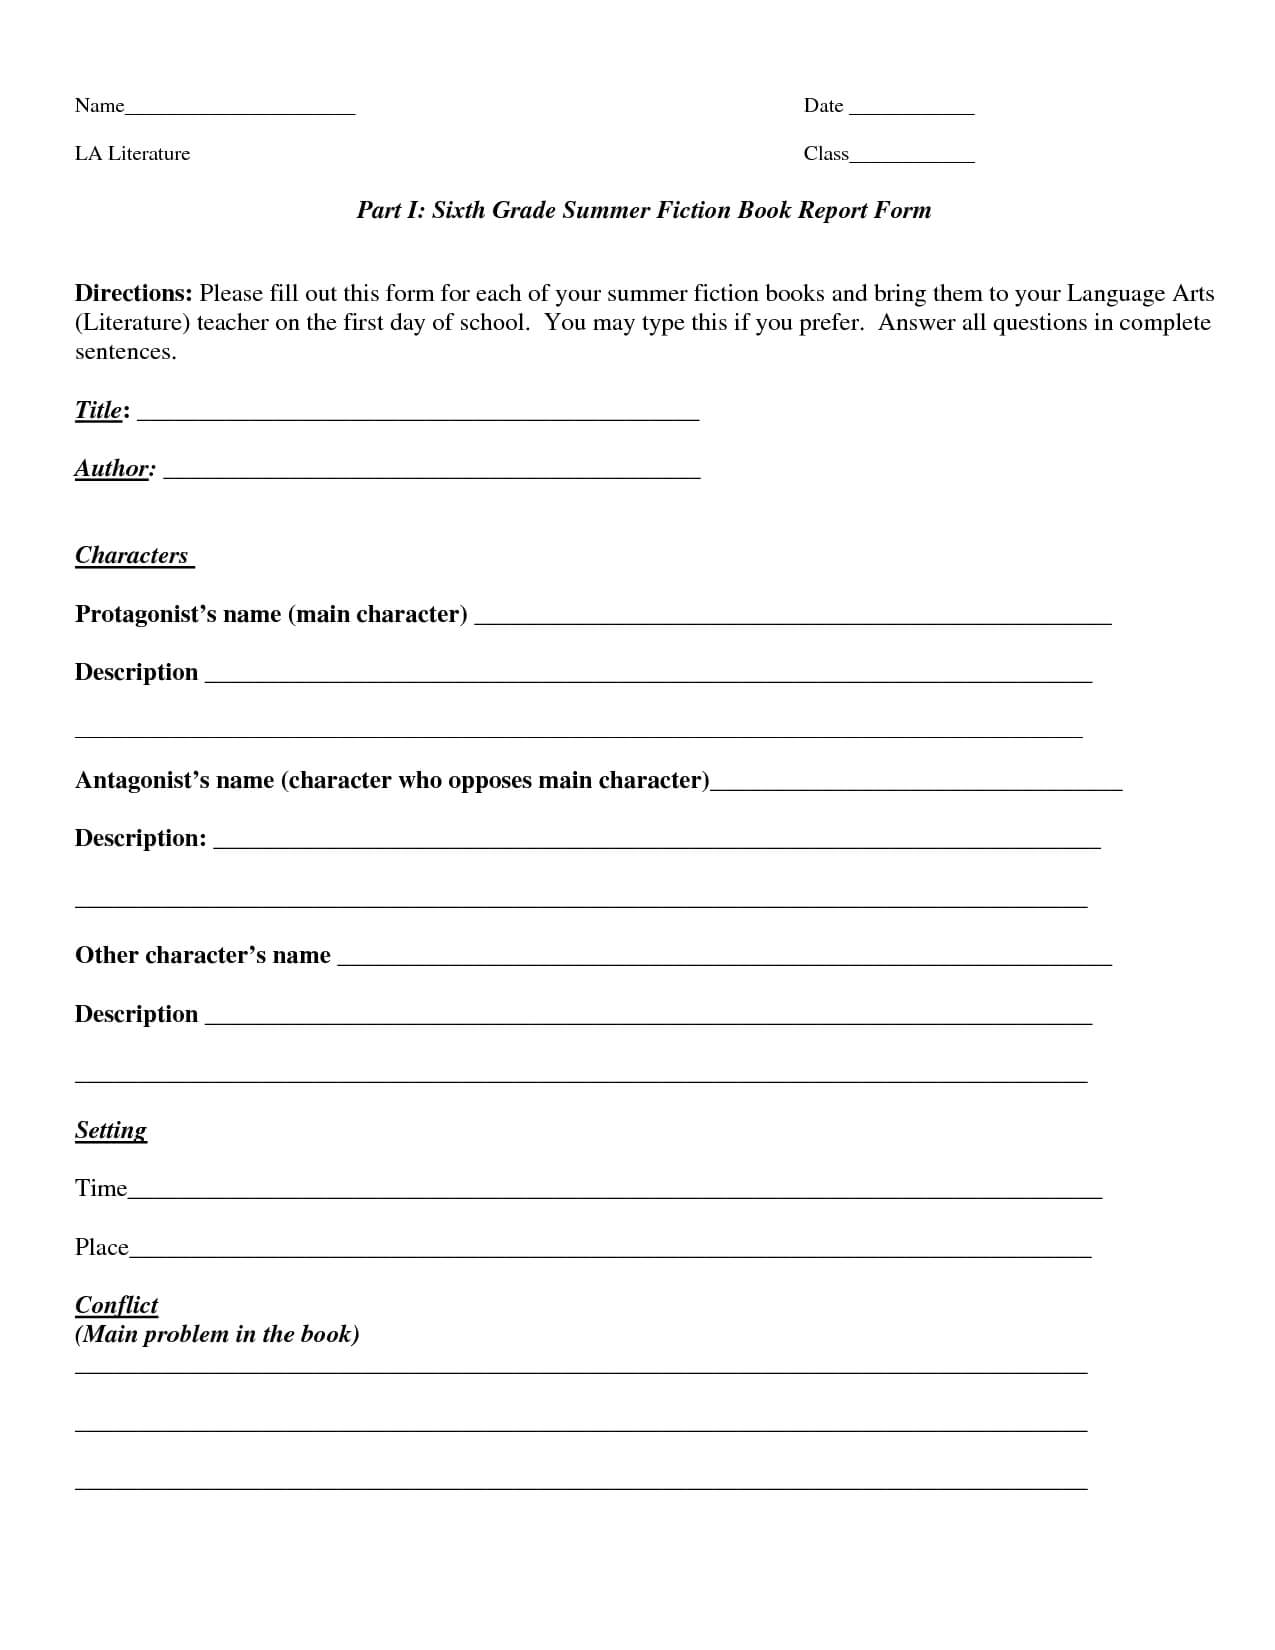 Book Report Template | Part I Sixth Grade Summer Fiction With Regard To 6Th Grade Book Report Template